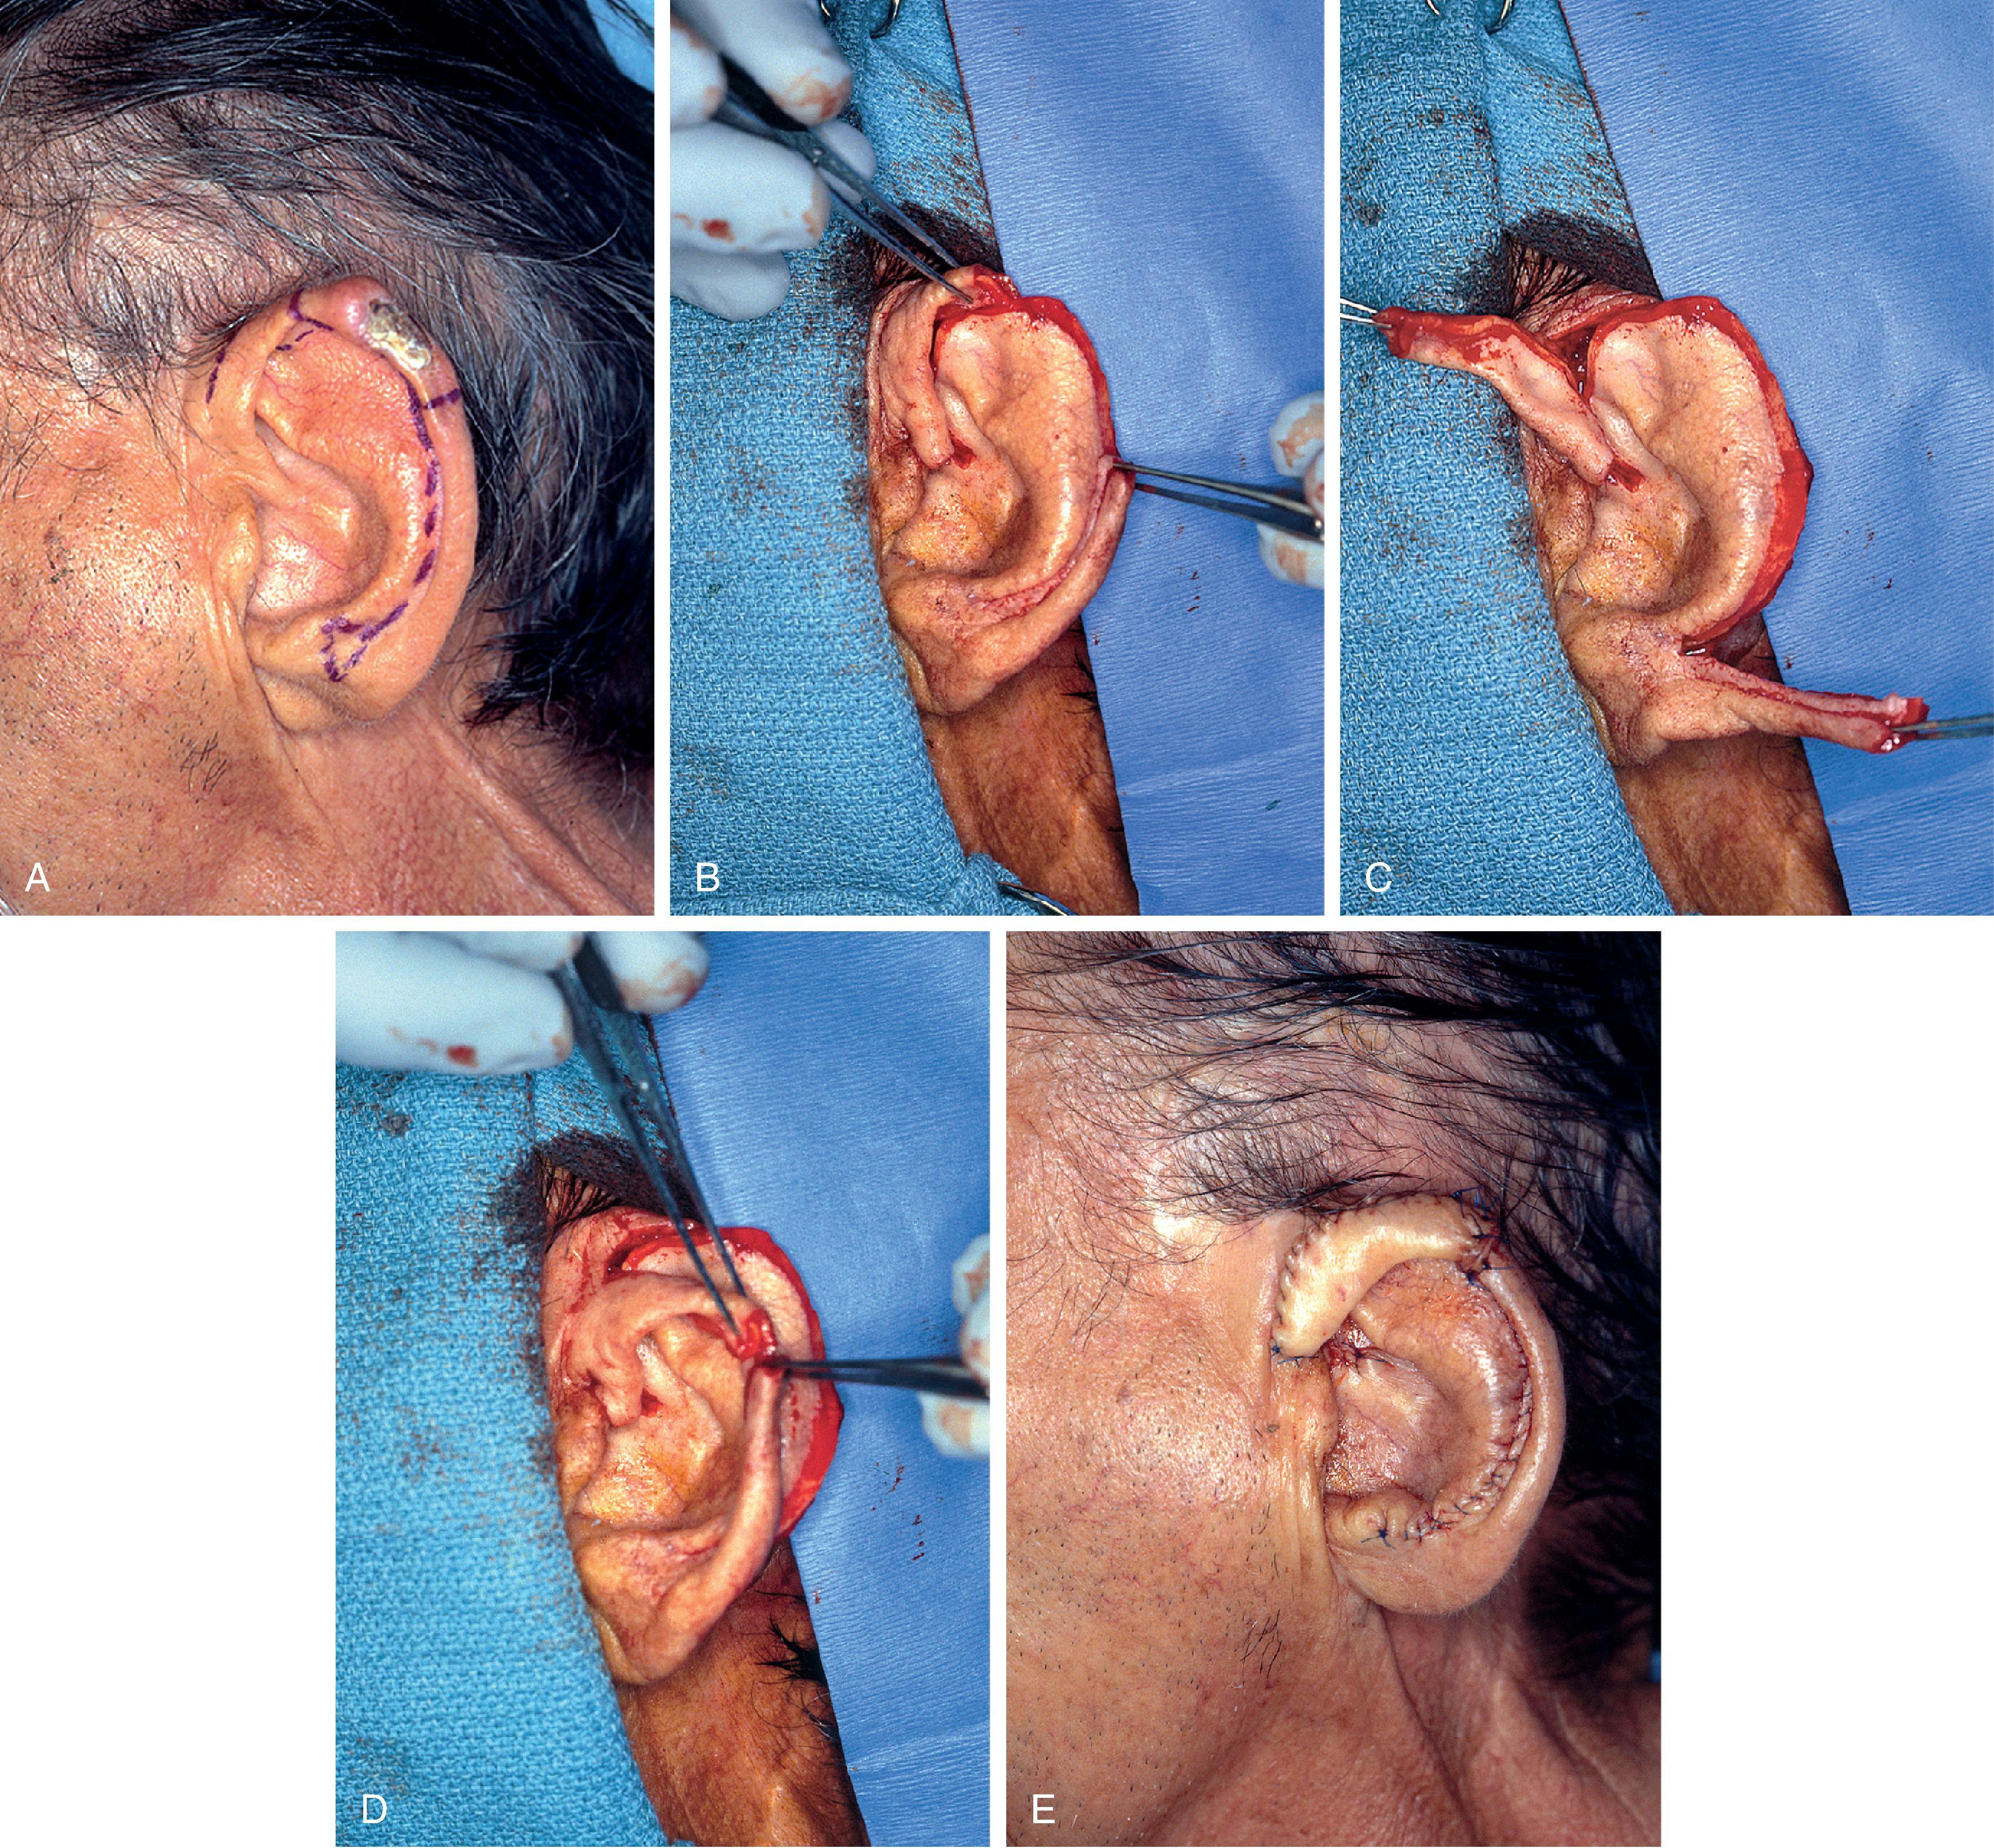 FIG. 22.8, A , Squamous cell carcinoma of helix marked for excision. Broken lines outline planned incisions for bilateral chondrocutaneous composite helical advancement flaps after excision of tumor. B , Tumor excised. One-third of helix removed. C , Advancement flaps incised. D , Apposition of flaps demonstrate requirement for reduction of scapha and superior antihelix. E , Wound closed after reduction. (Courtesy Shan R. Baker, MD.)